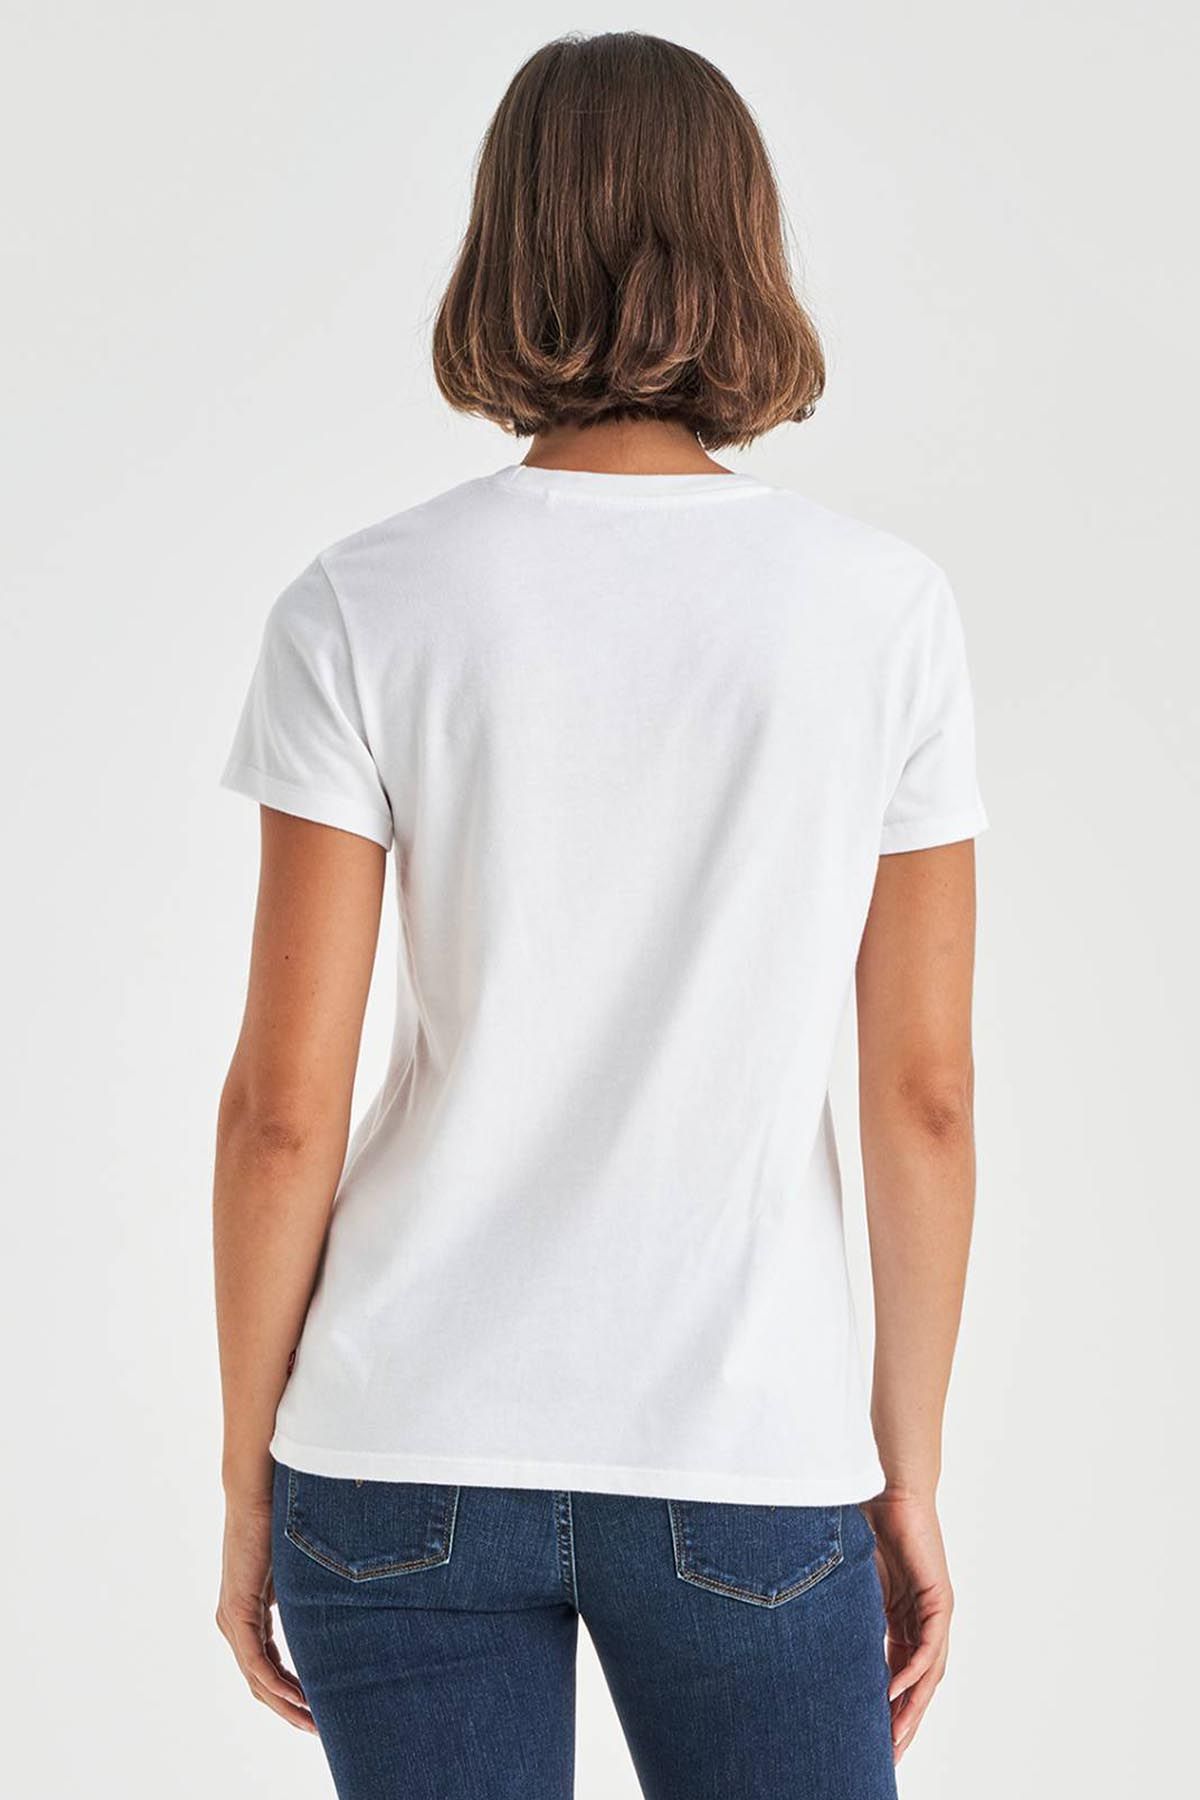 Levi's ® The Perfect Tee Performance Cool Poster White Women T-Shirts